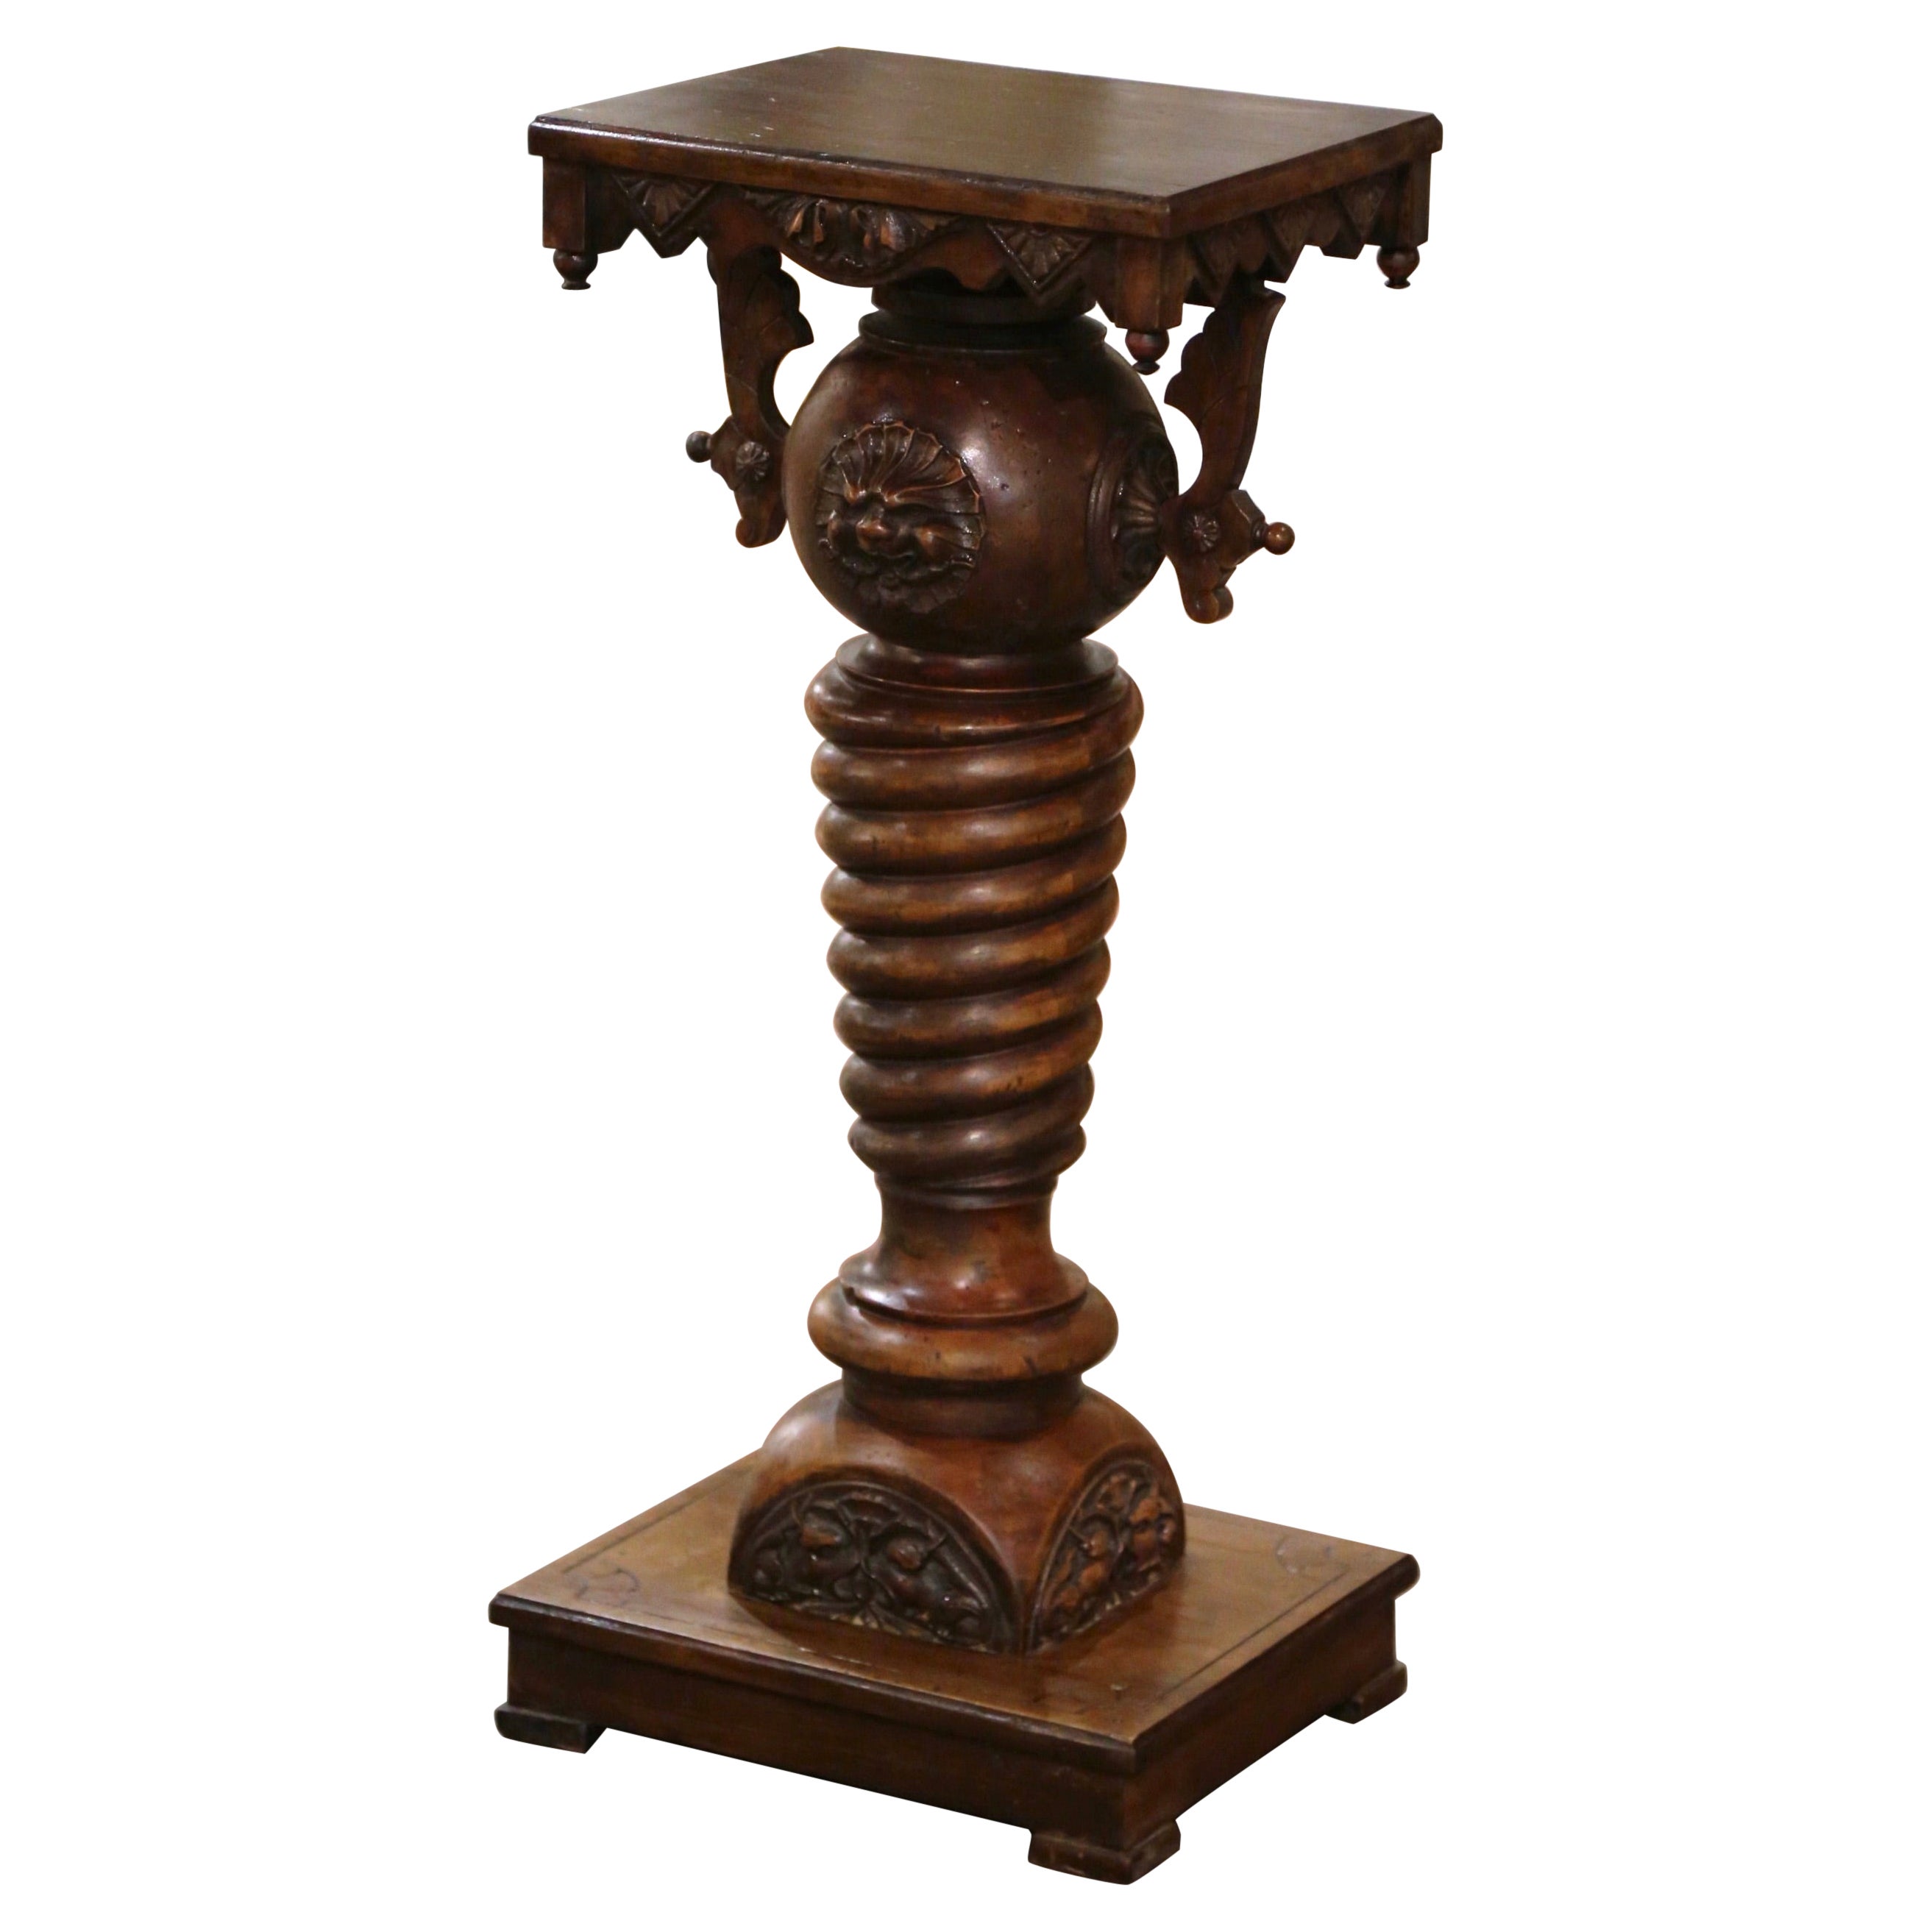 Early 20th Century French Baroque Carved Mahogany Barley Twist Pedestal Table